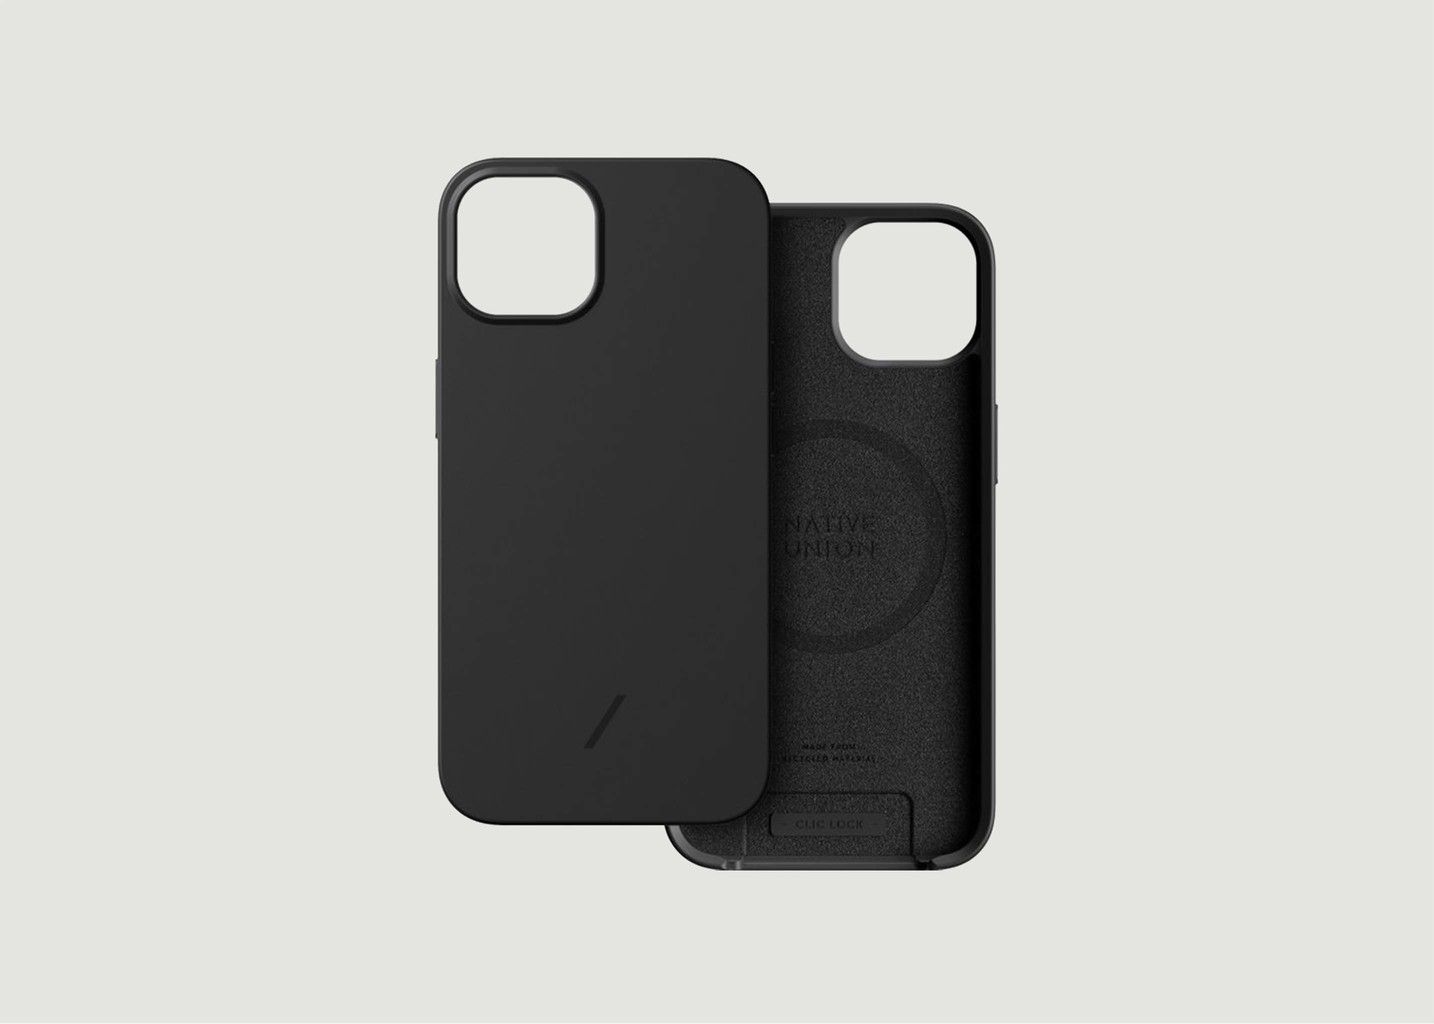 Native Union Case For Iphone 13 Clic Pop